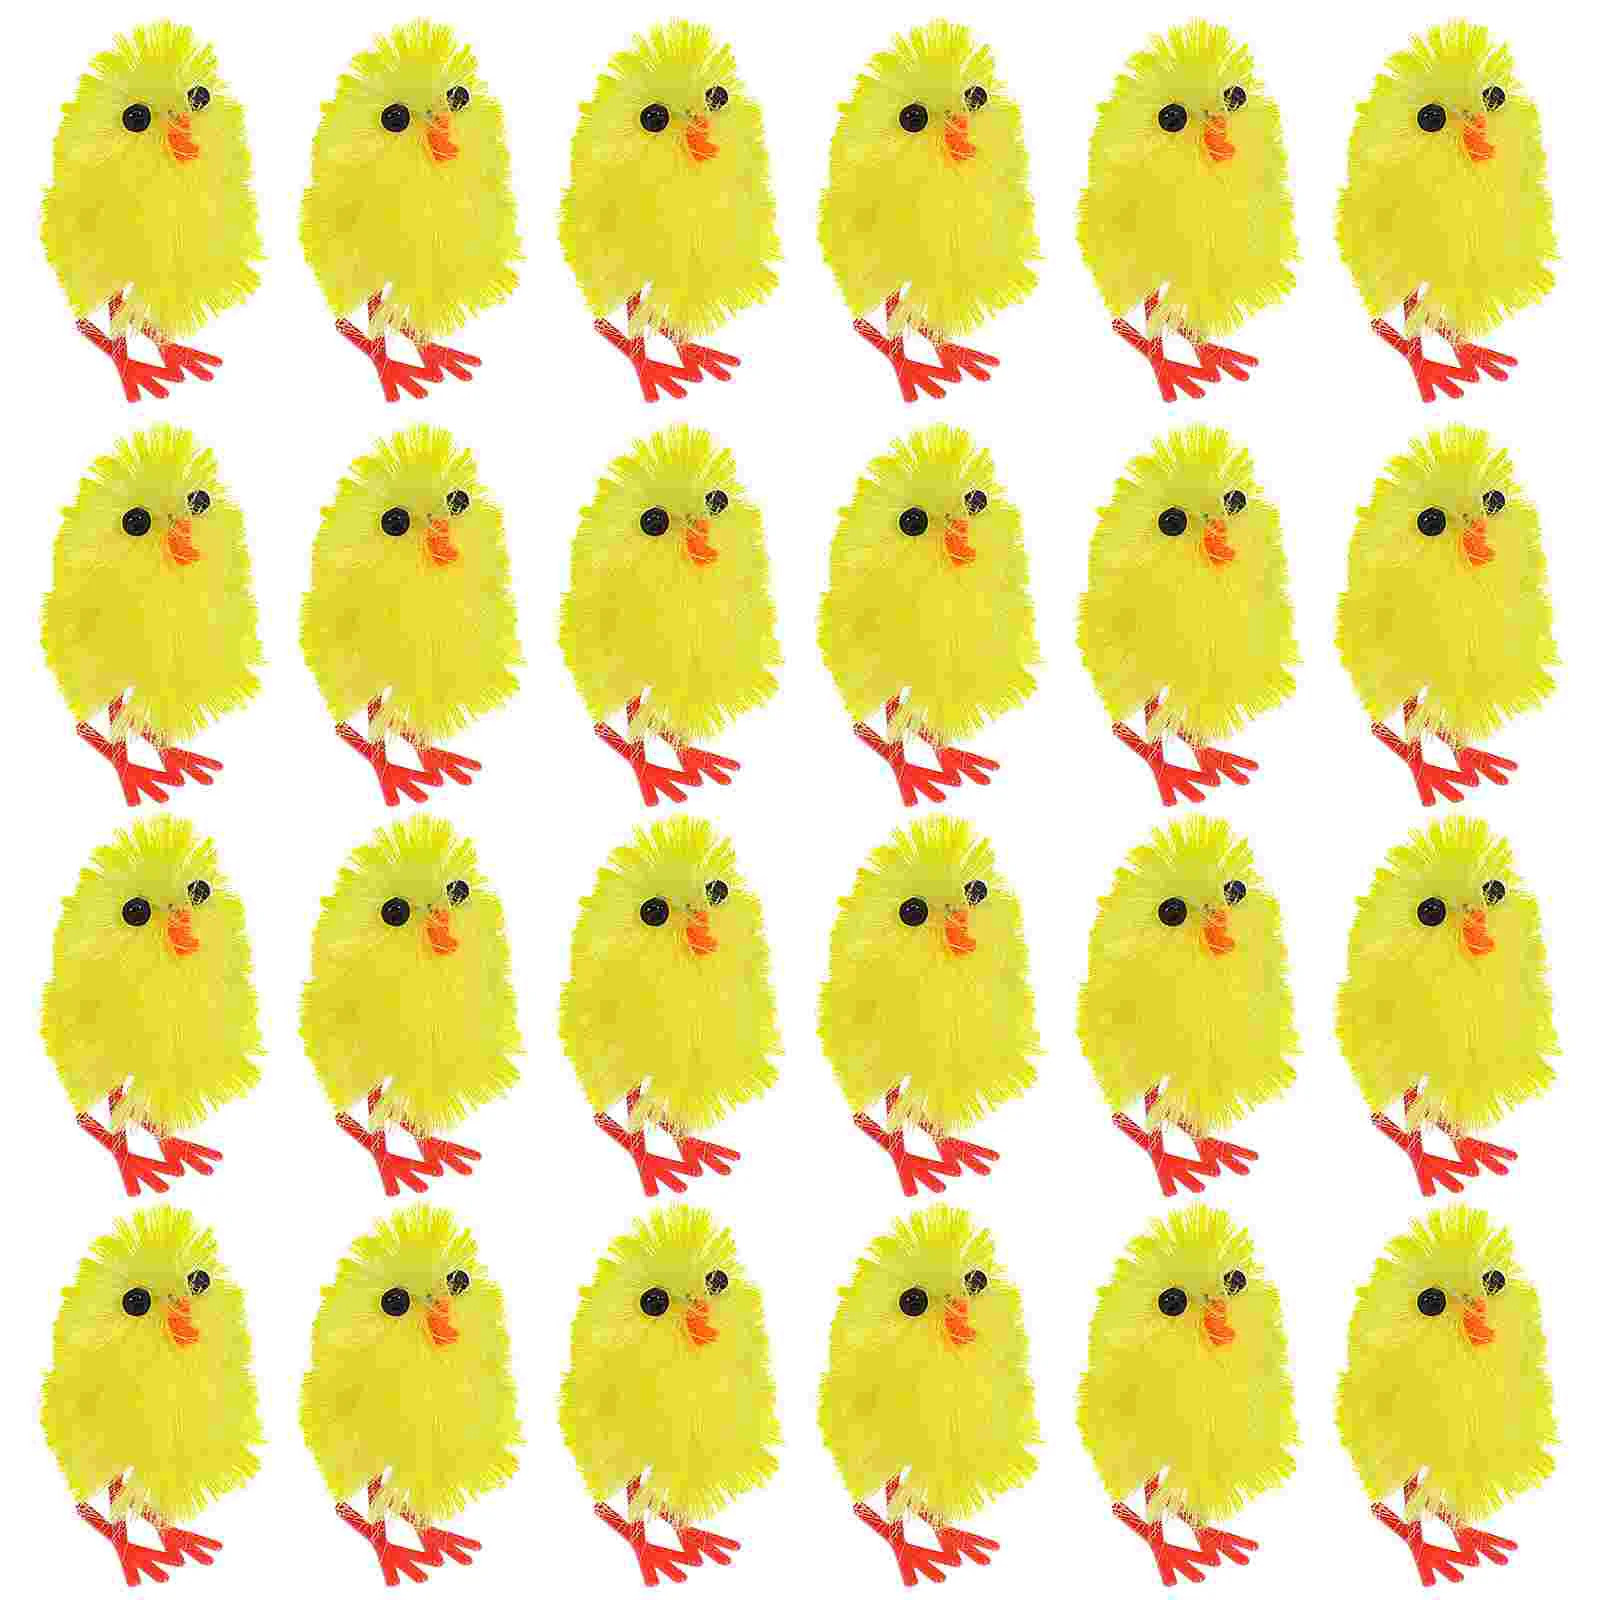 

Simulation Mini Easter Chicks Artificial Plush Yellow Chicken Desktop Ornament Spring Party Favors Decoration